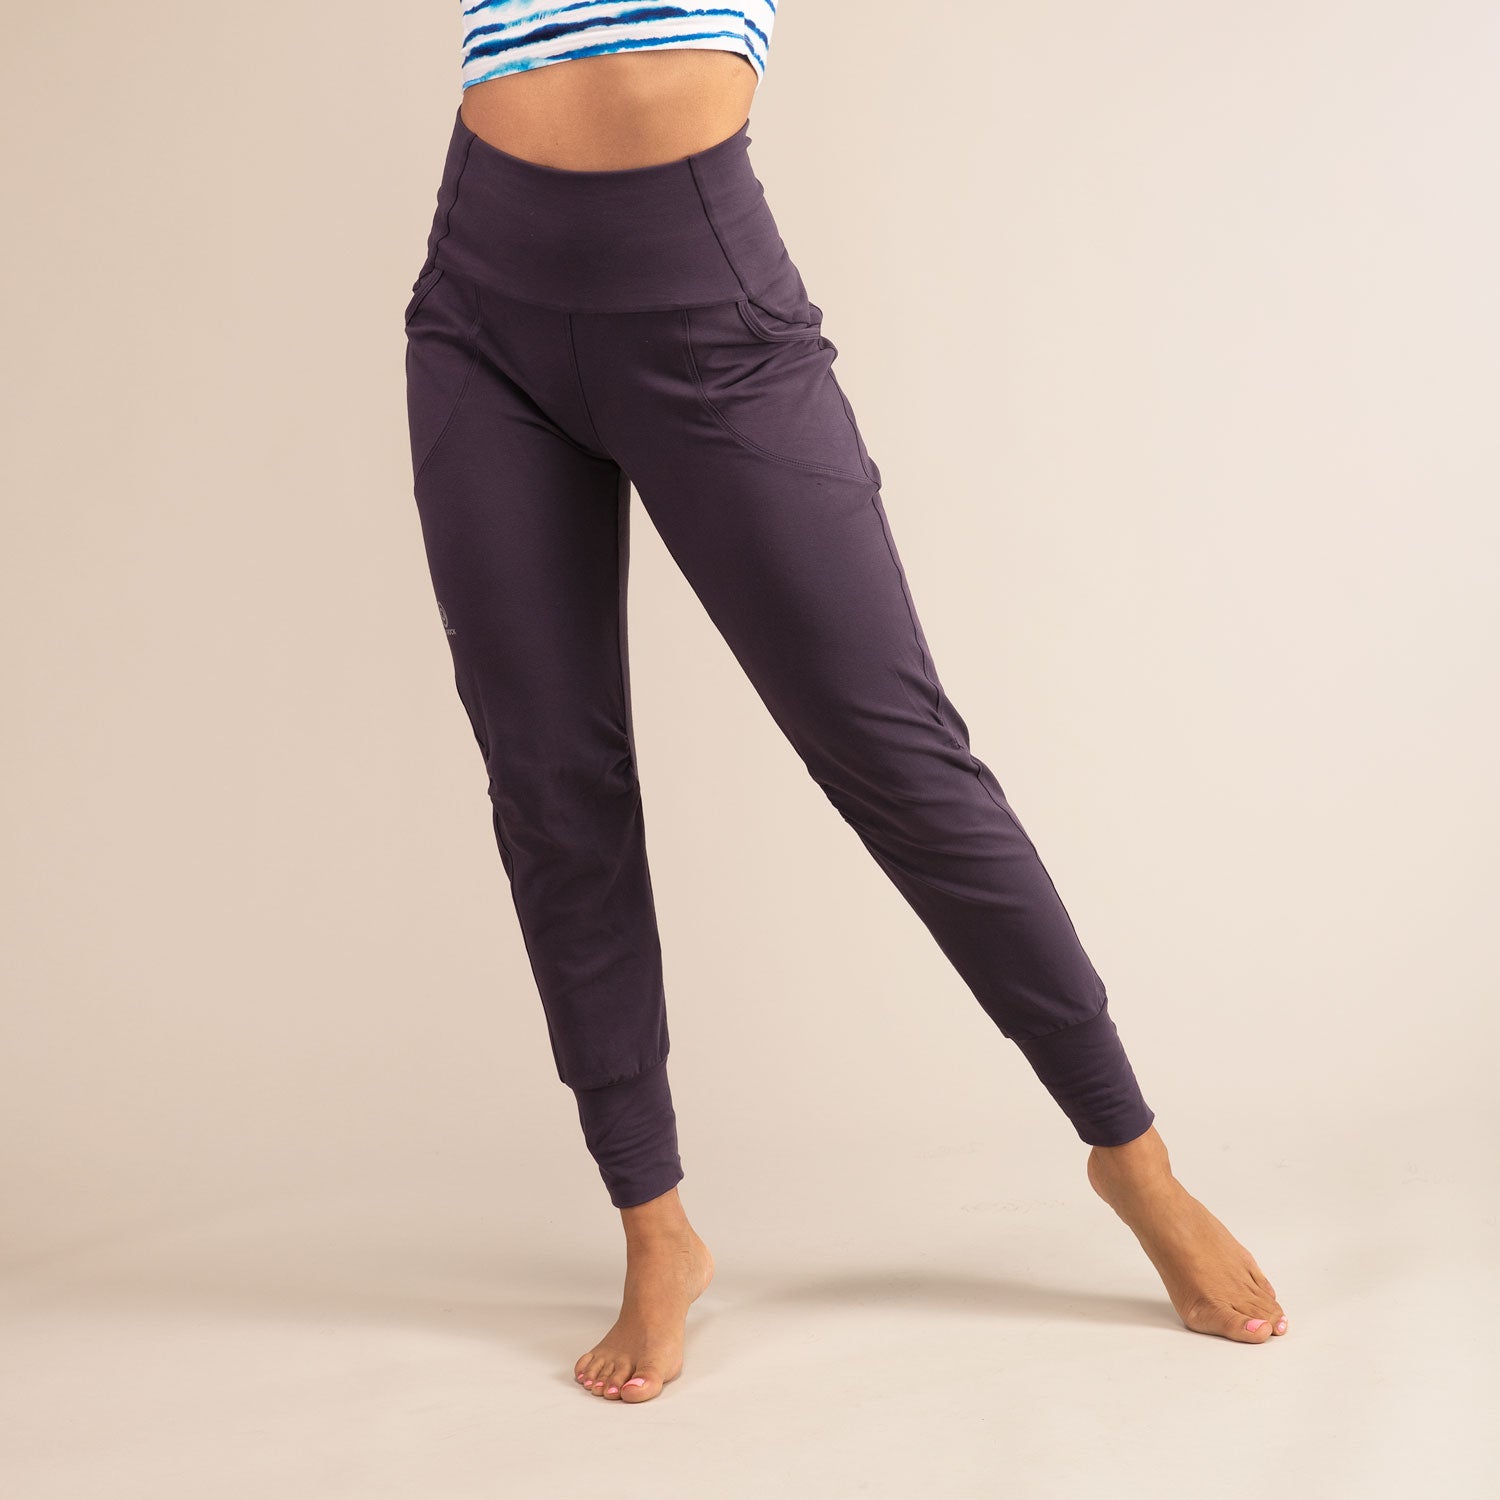 BATABOOM Sweatpants | Super Soft Organic Sweats | 3RD ROCK Clothing -  Kendal is 5ft 7 with a 28" waist, 38" hips and wears a size 30/RL. F